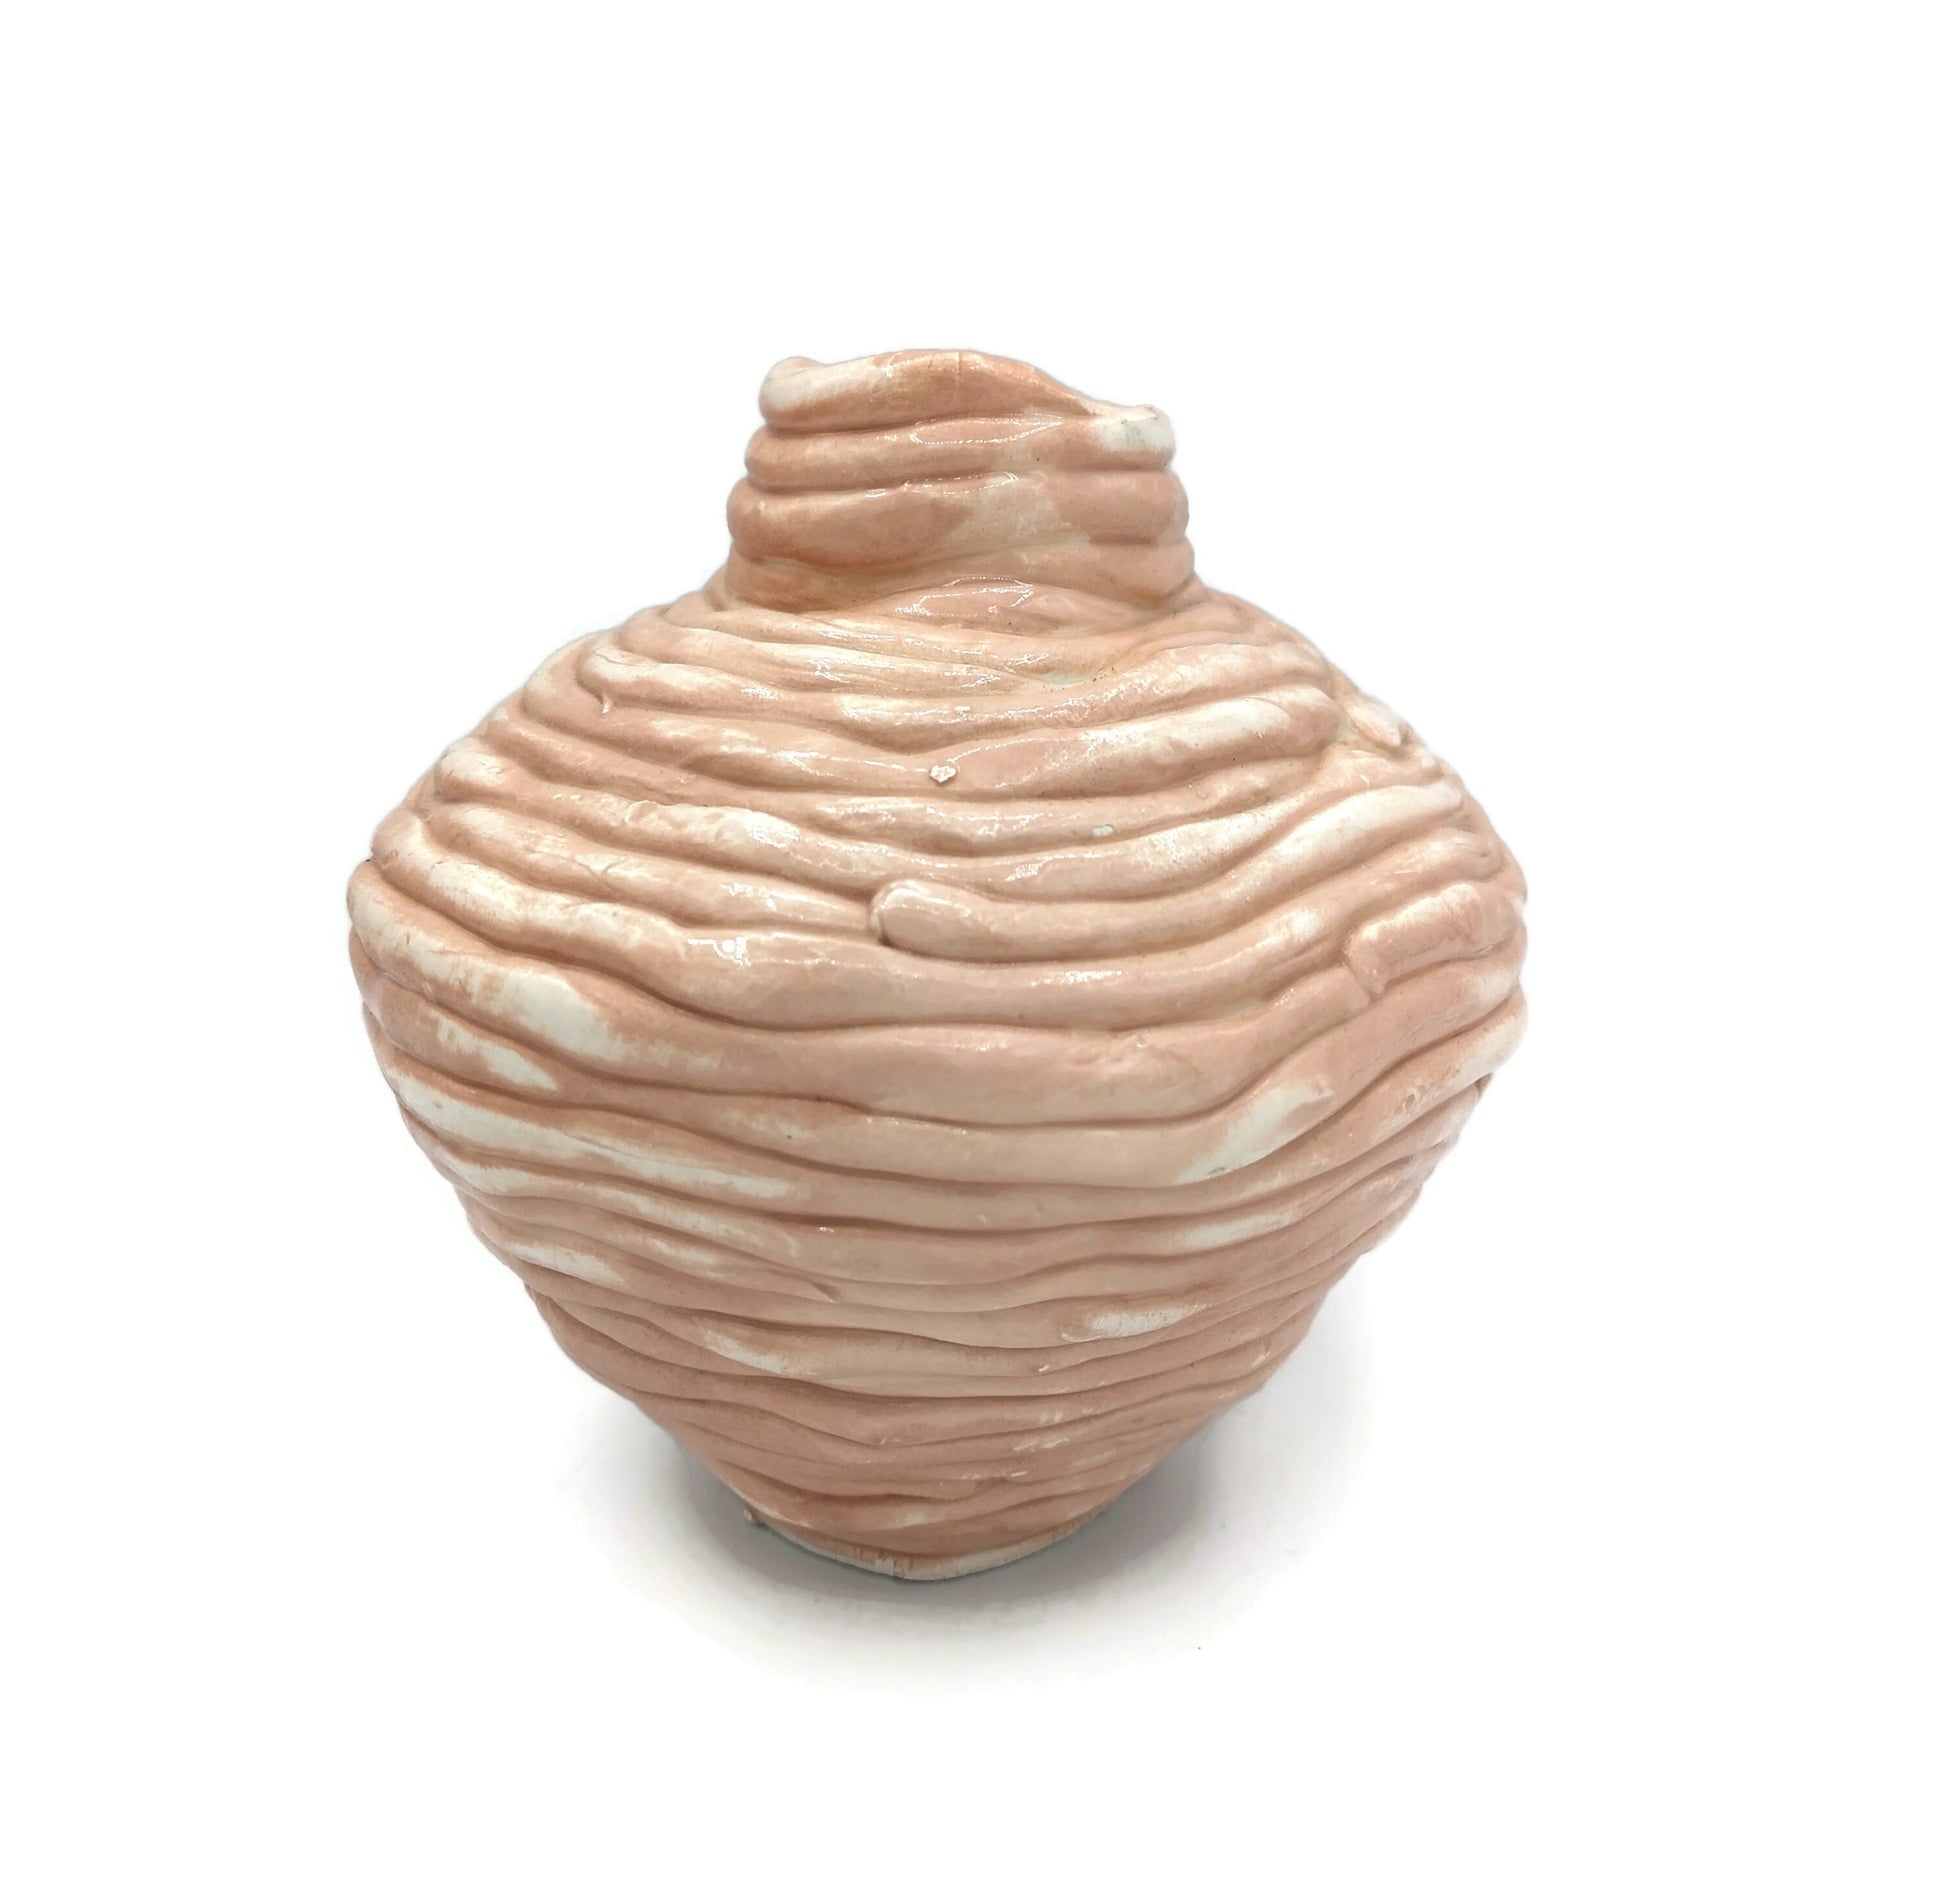 Handmade Ceramic Sculptural Pink Vase For Home Decor, Unique Textured Organic Shape Mid Century Modern Pottery 9th-anniversary gift for wife - Ceramica Ana Rafael